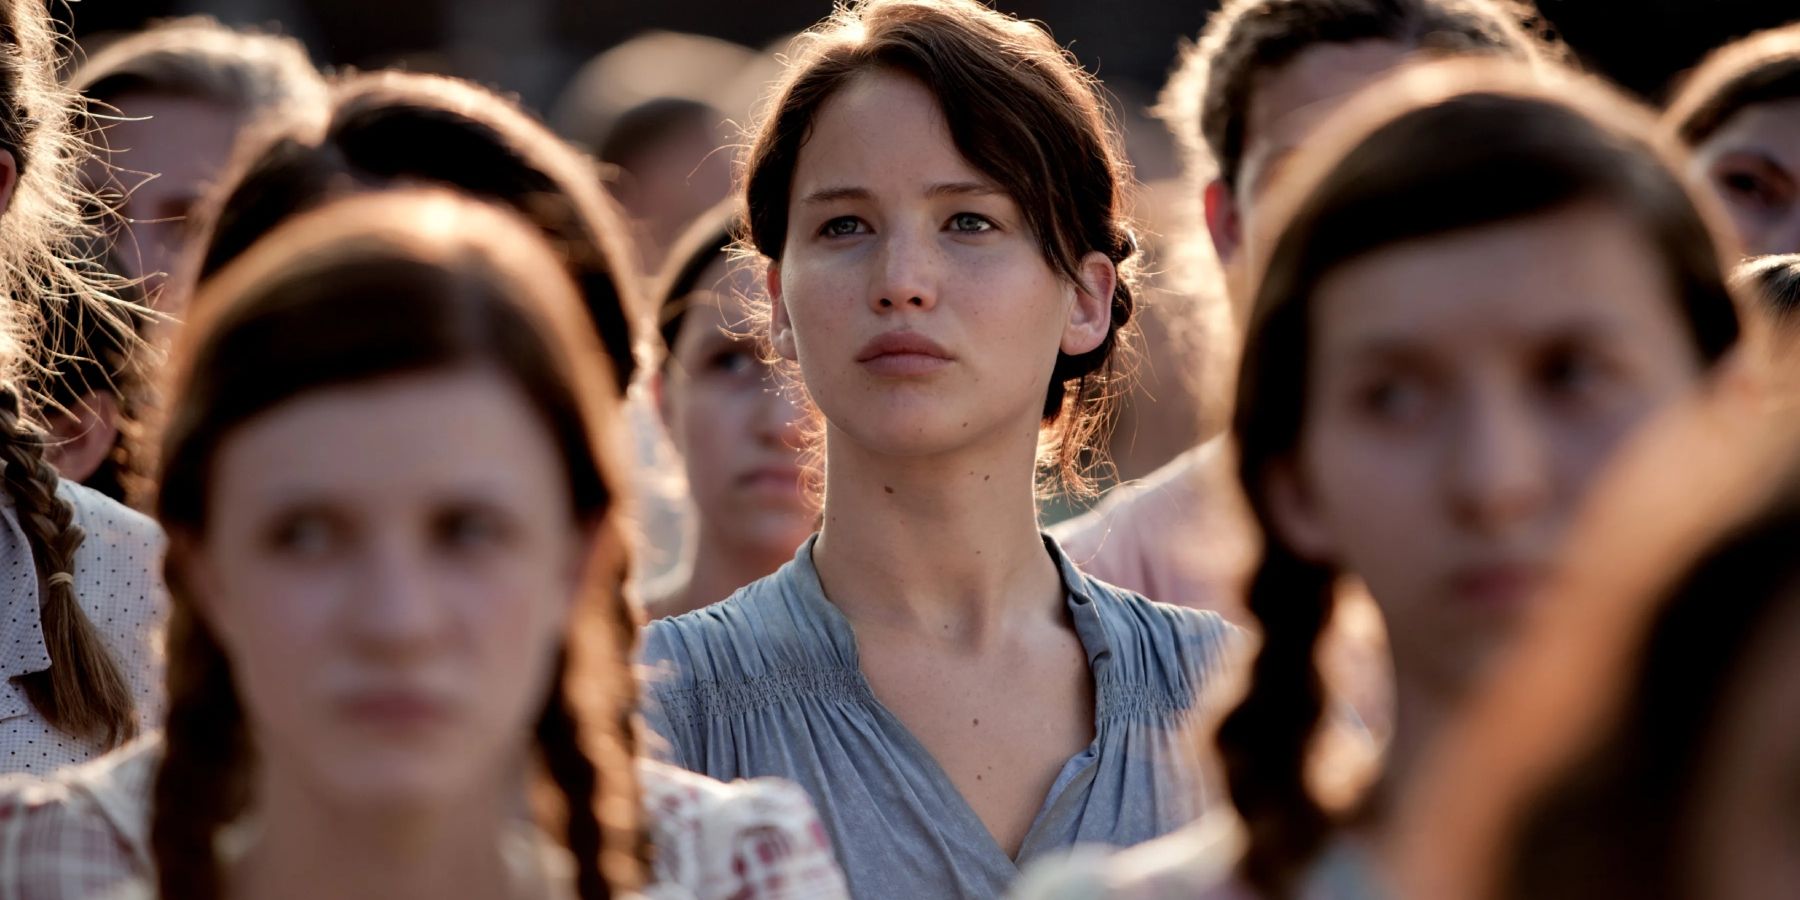 Katniss Everdeen (Jennifer Lawrence) standing with other District 12 residents in The Hunger Games